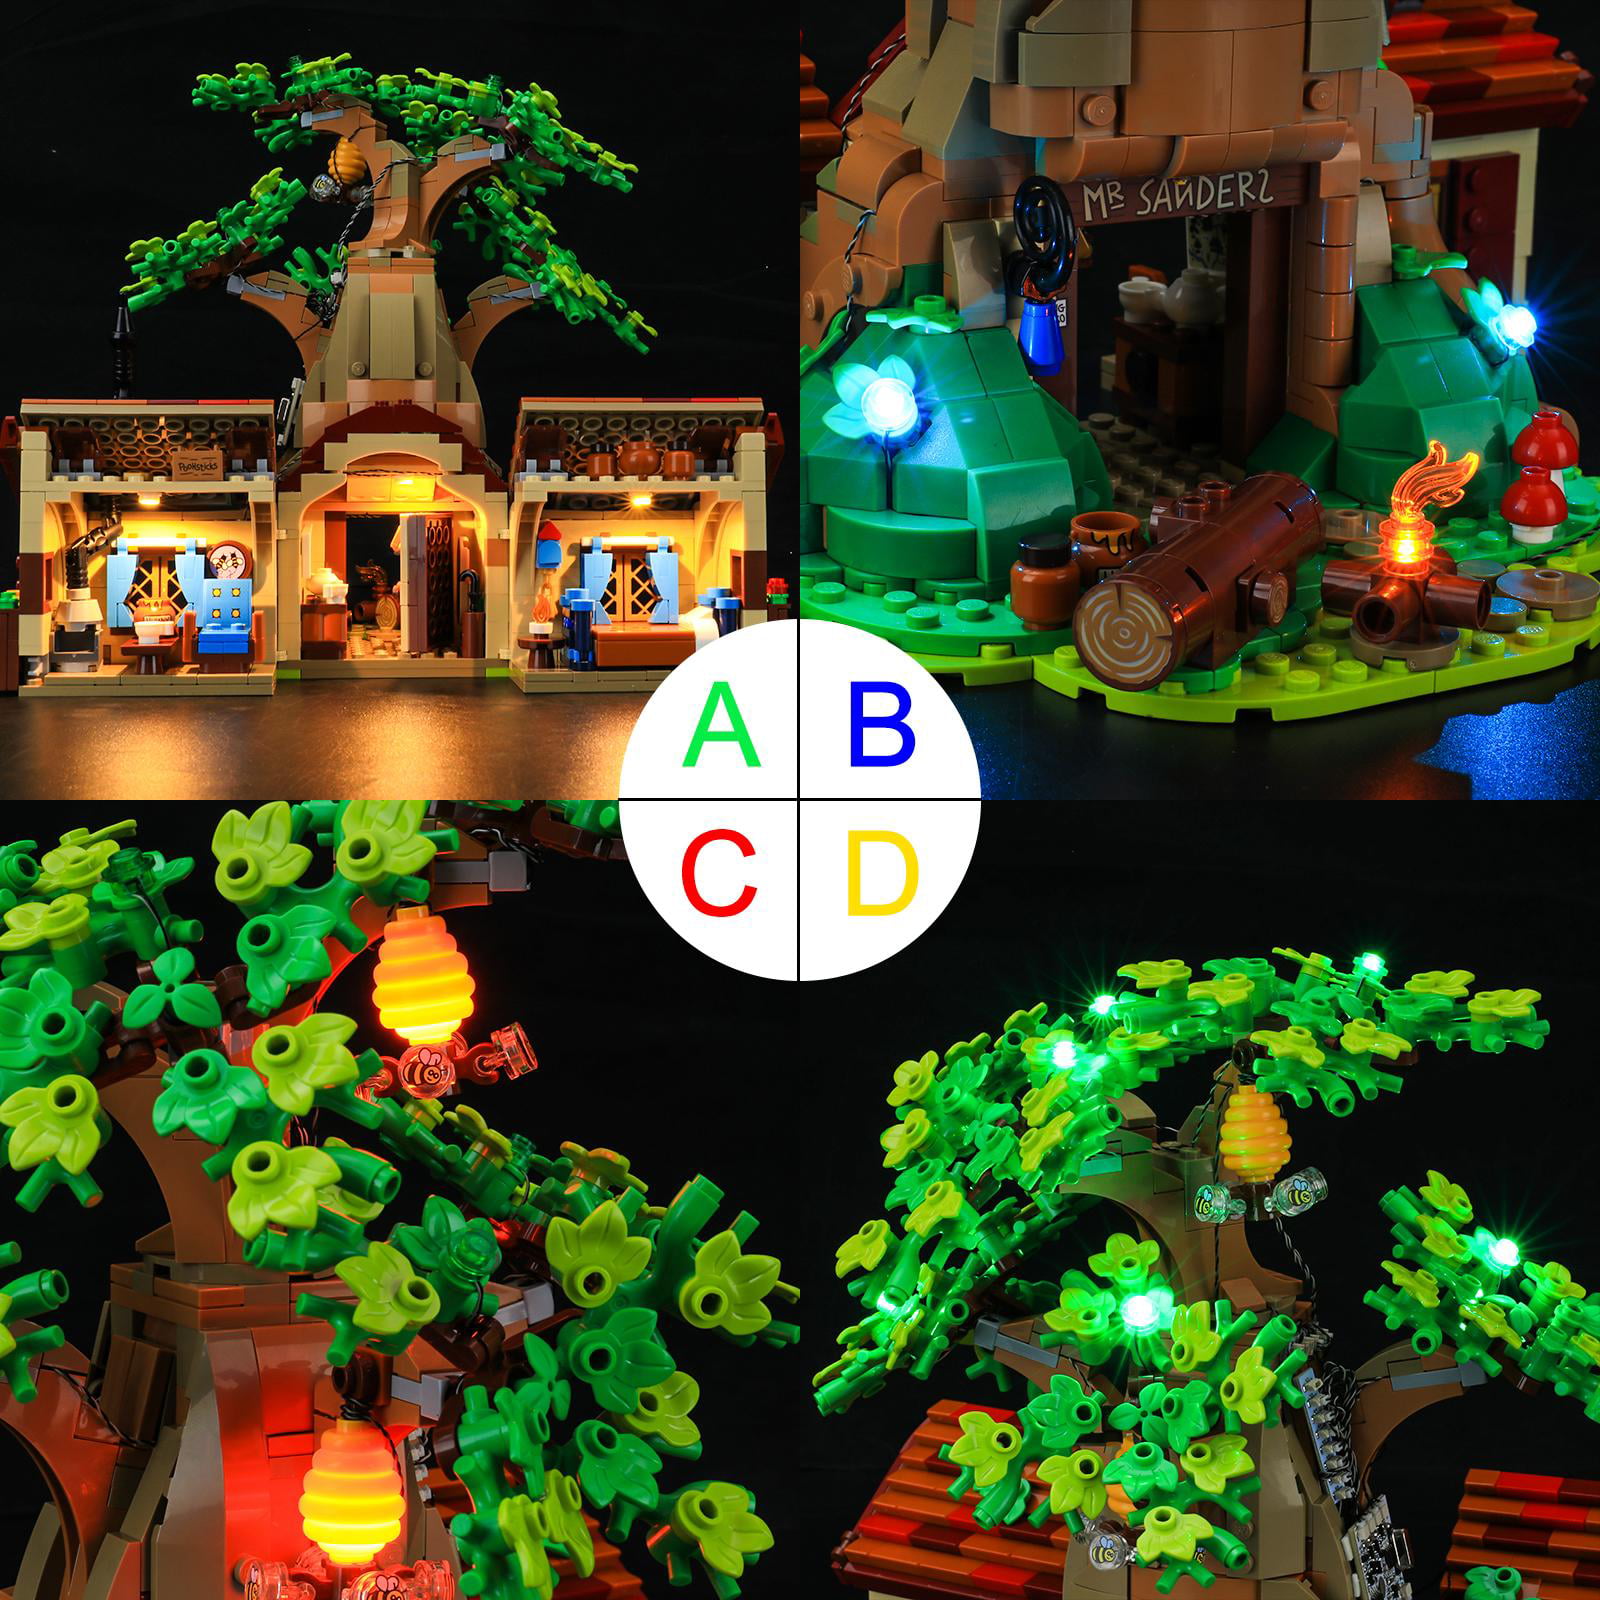 Compatible with Lego 21326 Building Blocks Model BRIKSMAX Led Lighting Kit for Winnie The Pooh Not Include The Lego Set 